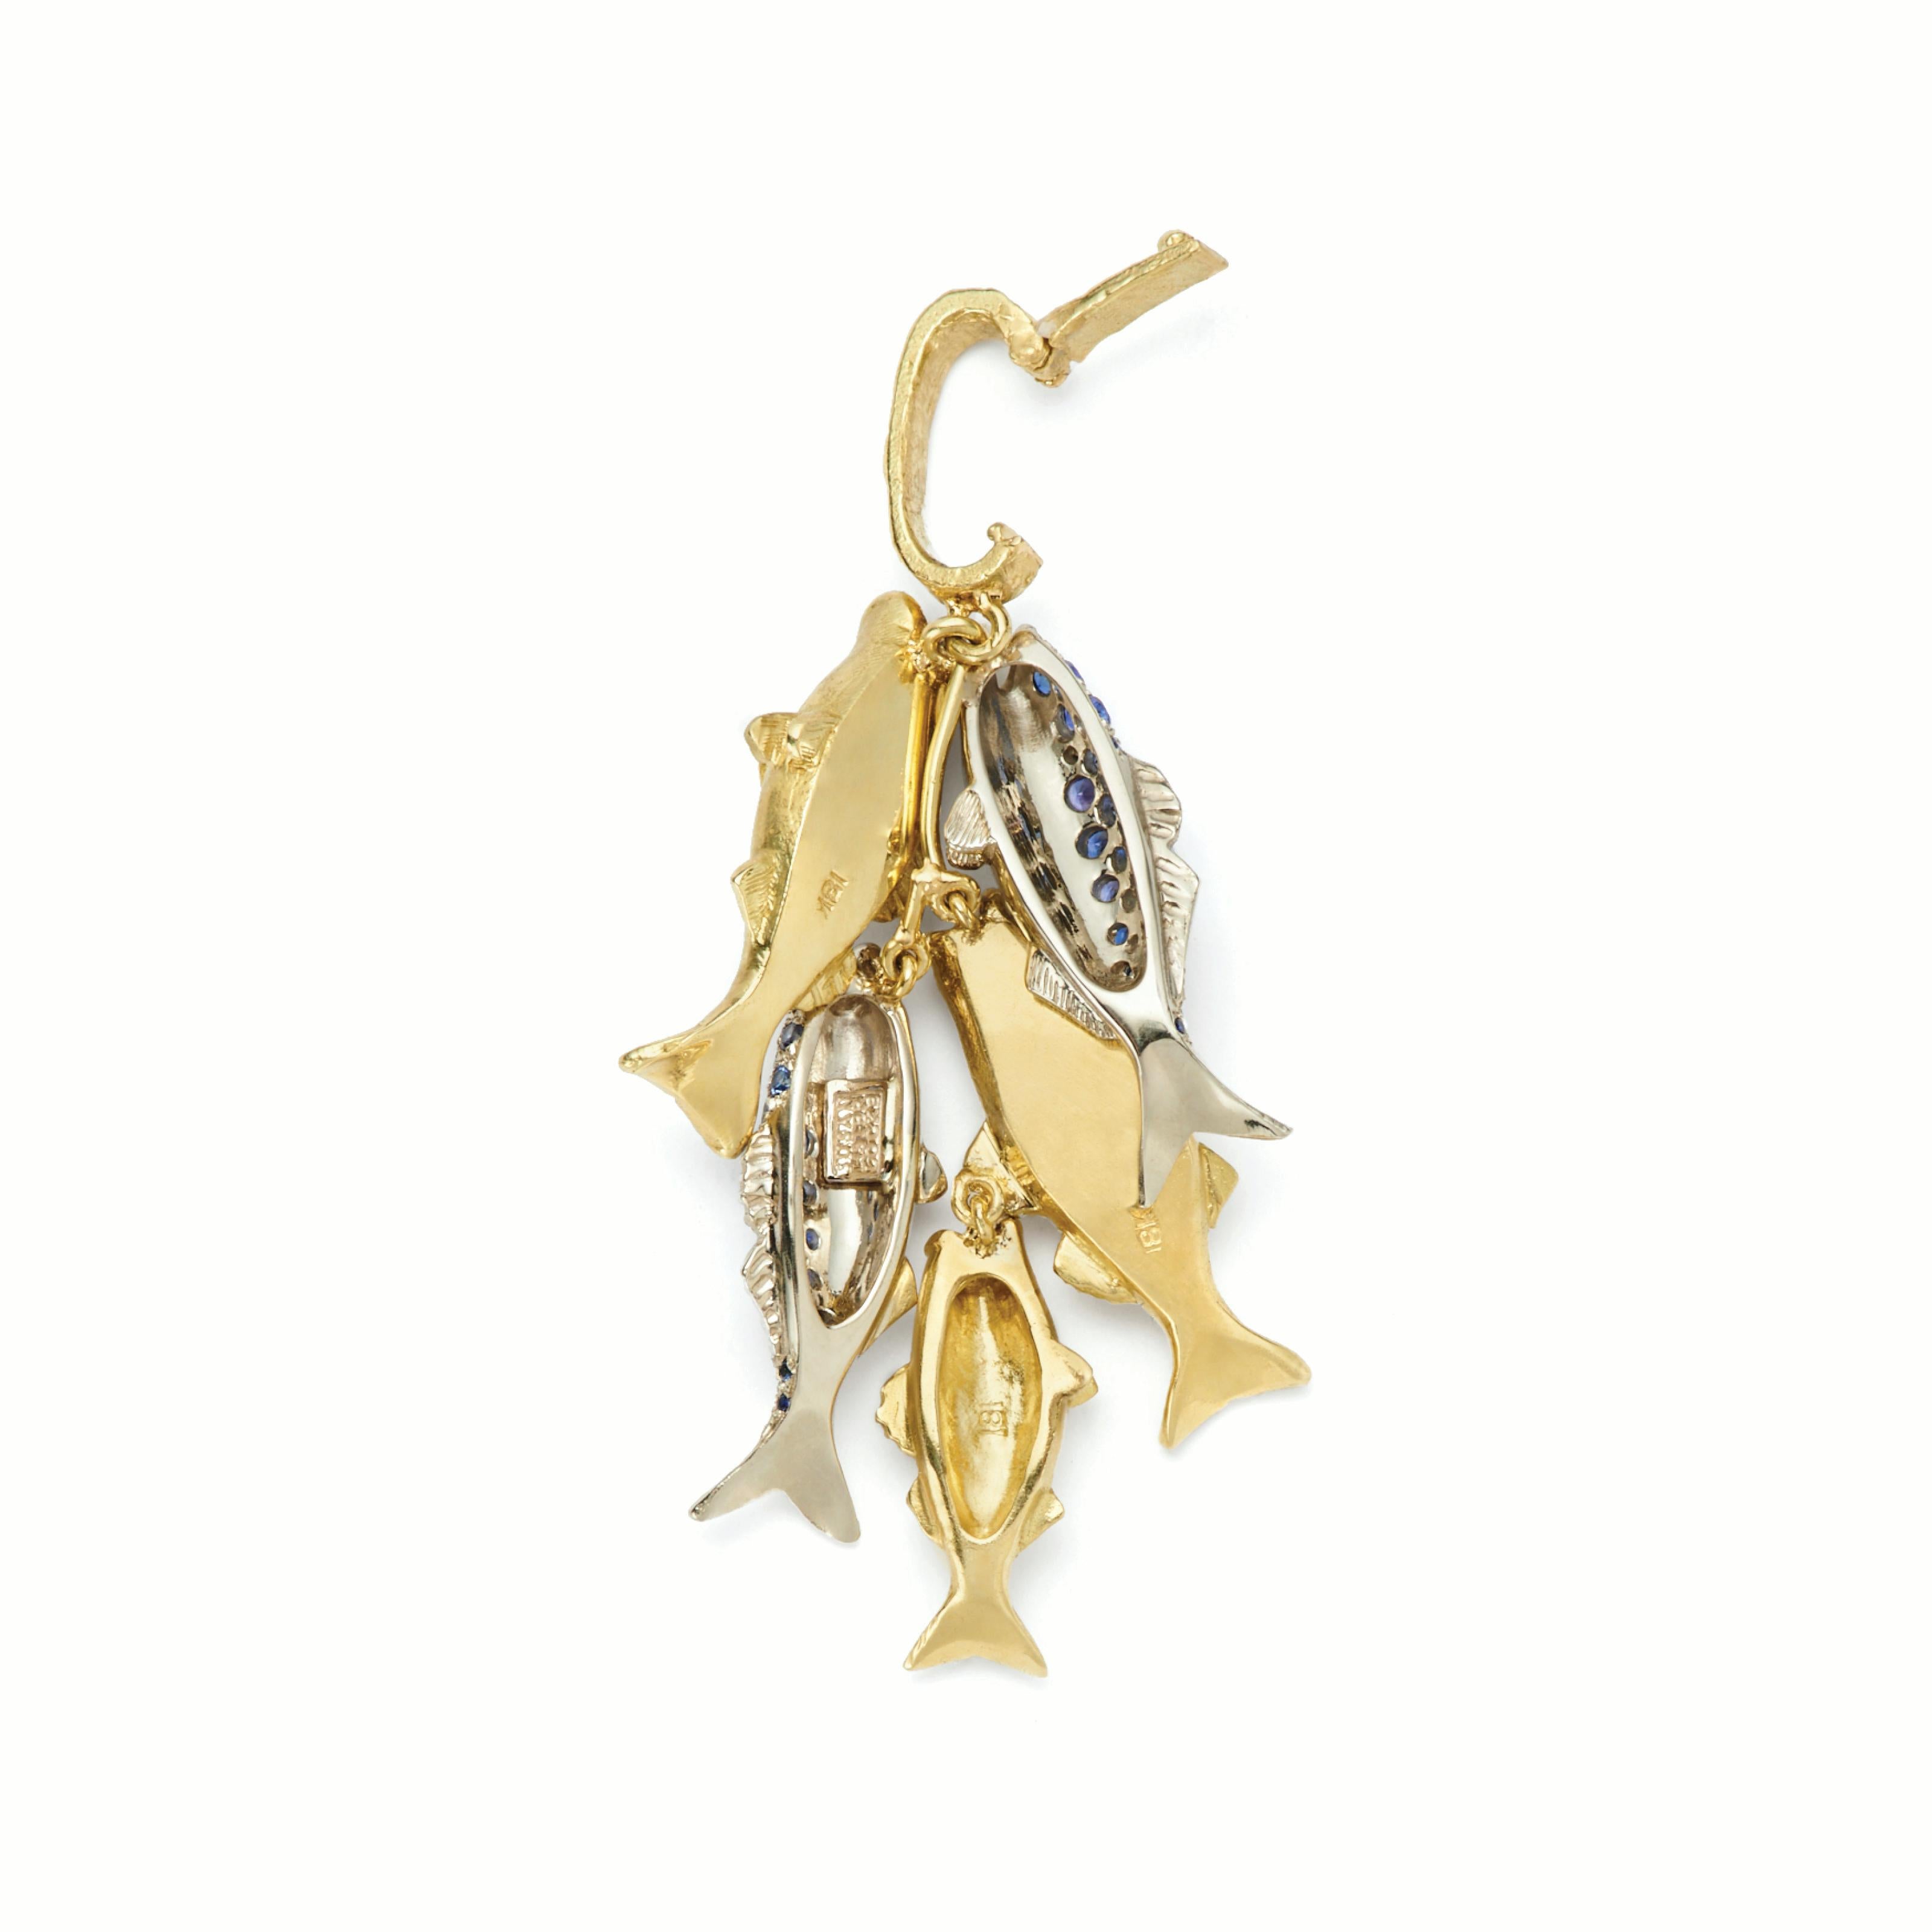 Don’t let any of these get away …

Our Daily Catch Pendant is made up of:
• 2 Large Nantucket Striped Bass Pendants in 18kt Yellow Gold
• 1 Small Nantucket Striped Bass Pendant in 18kt Yellow Gold
• 2 Nantucket Bluefish Sapphire and 18kt White Gold